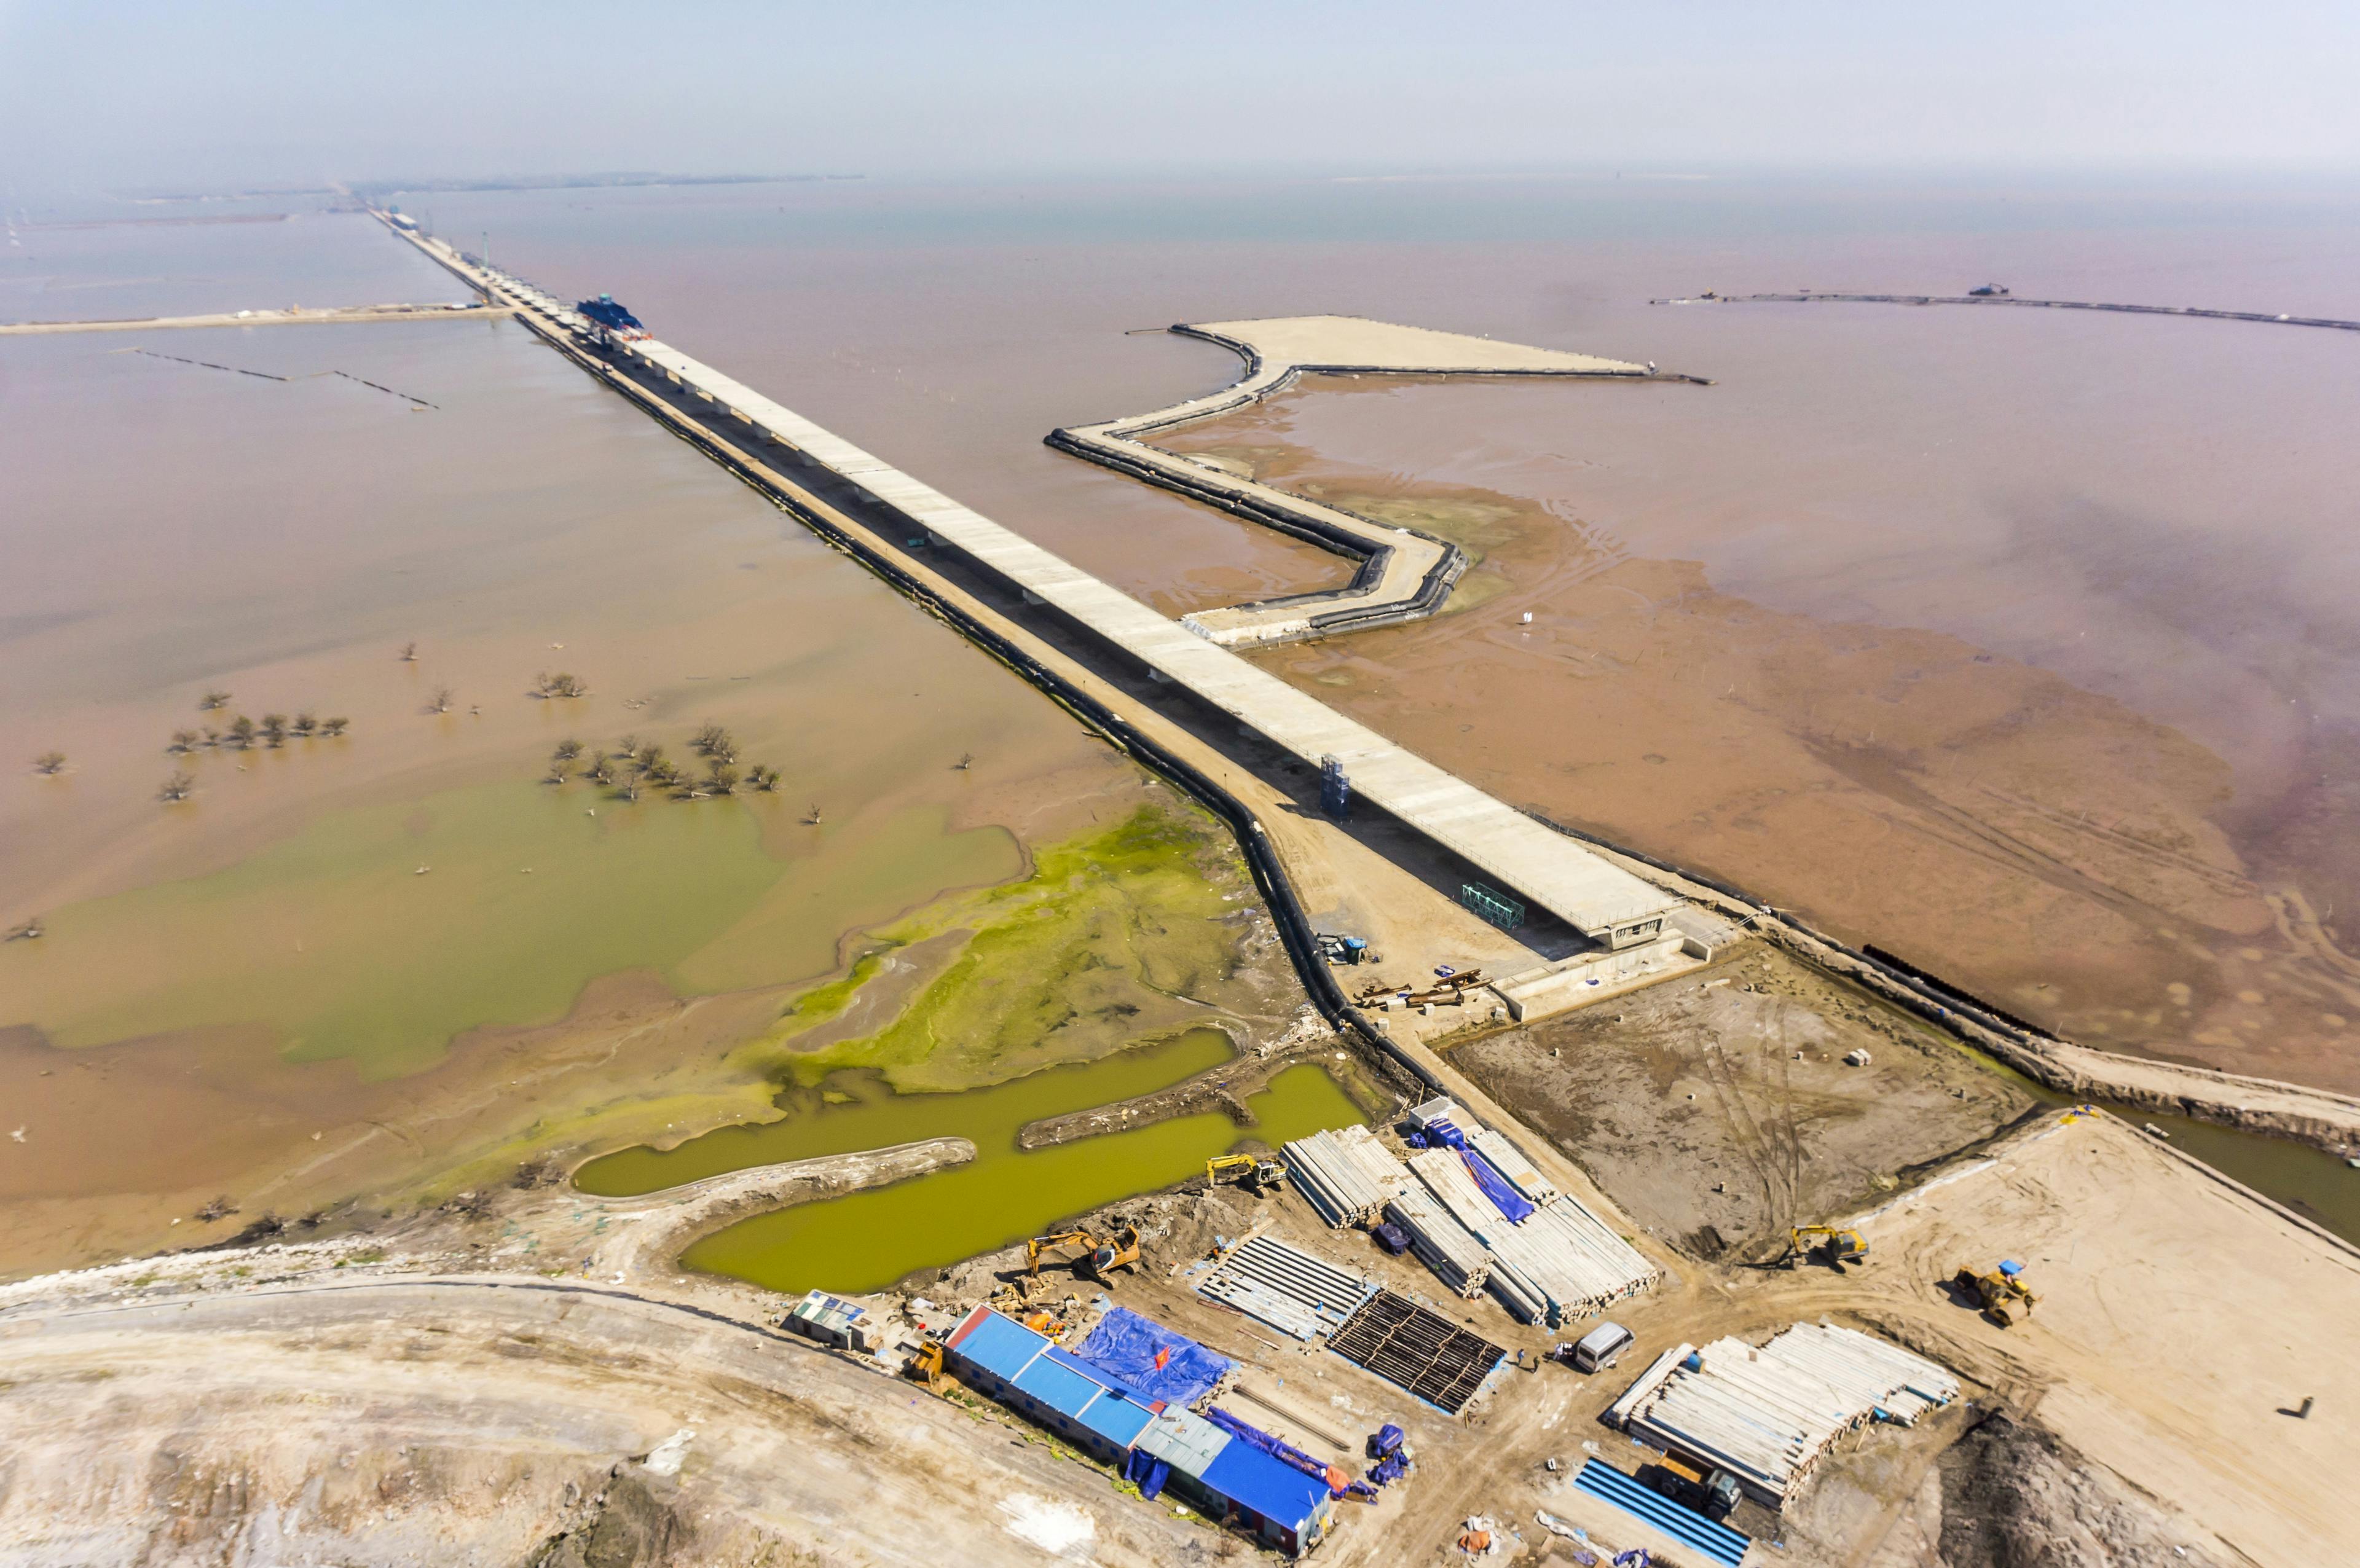 Over 27 km (16.8 miles) of geotextile tubes were installed for the construction of the Lach Huyen Bridge in Vietnam.